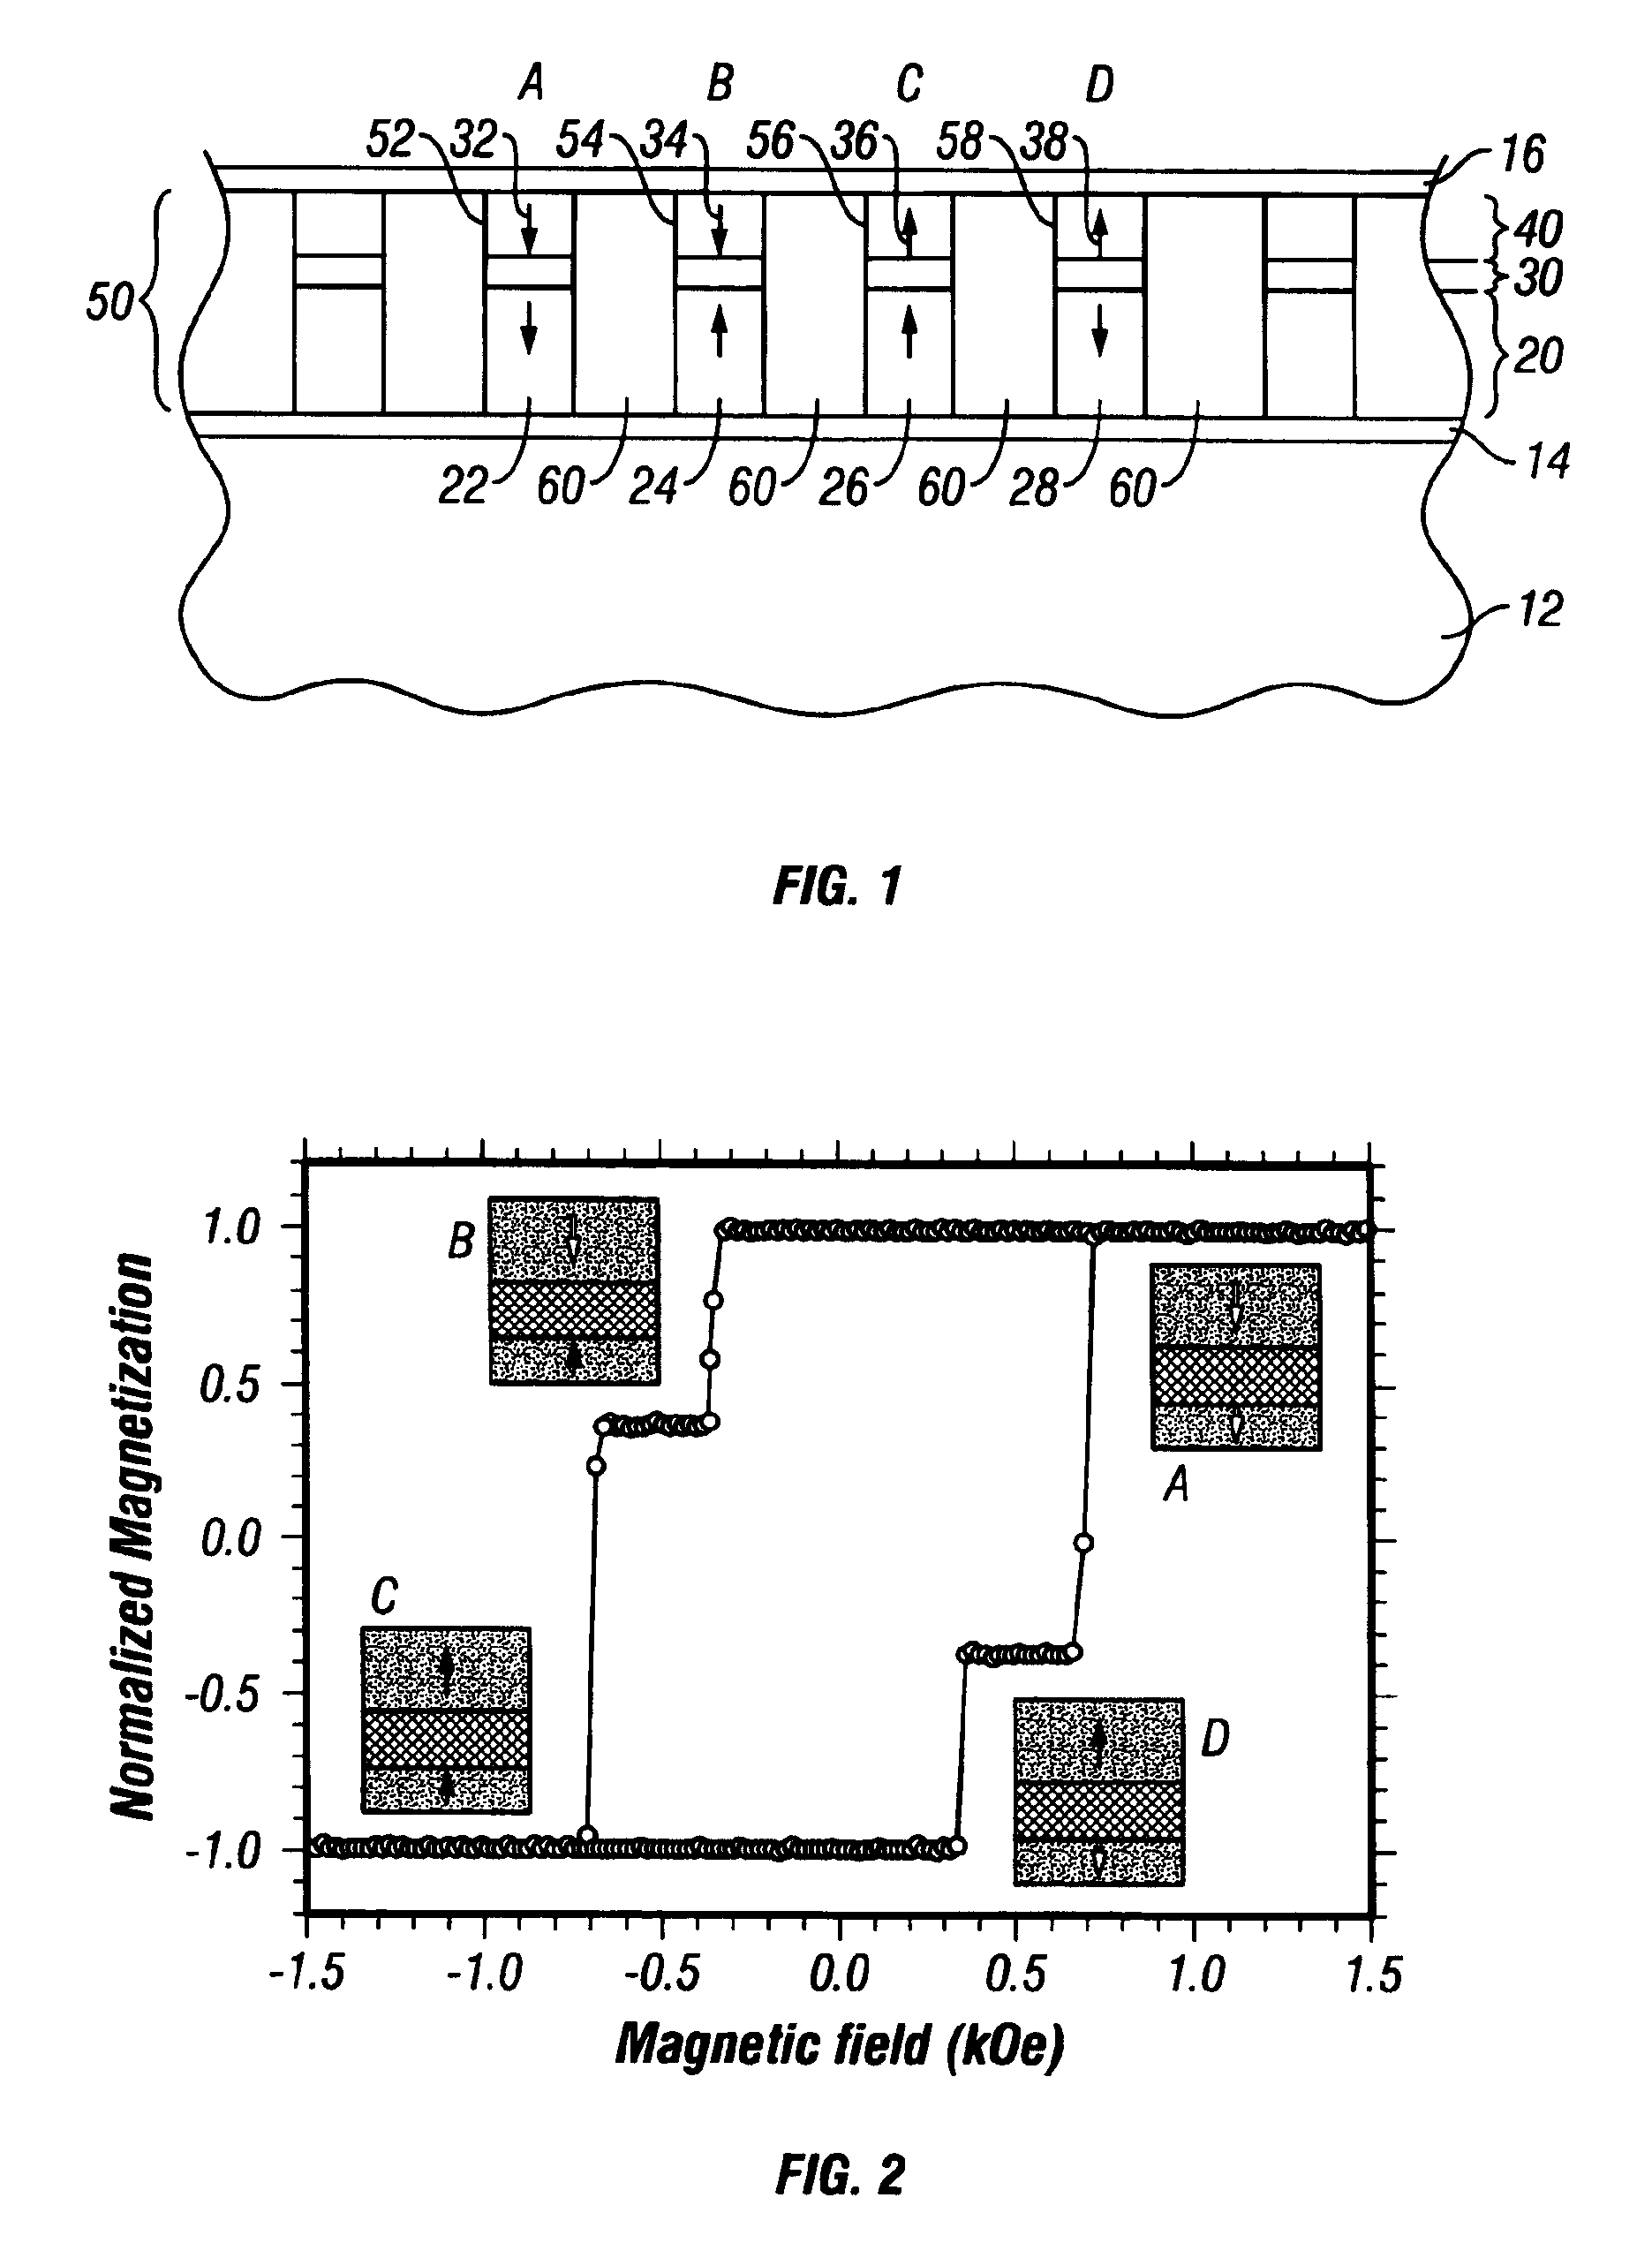 Method for magnetic recording on patterned multilevel perpendicular media using thermal assistance and fixed write current